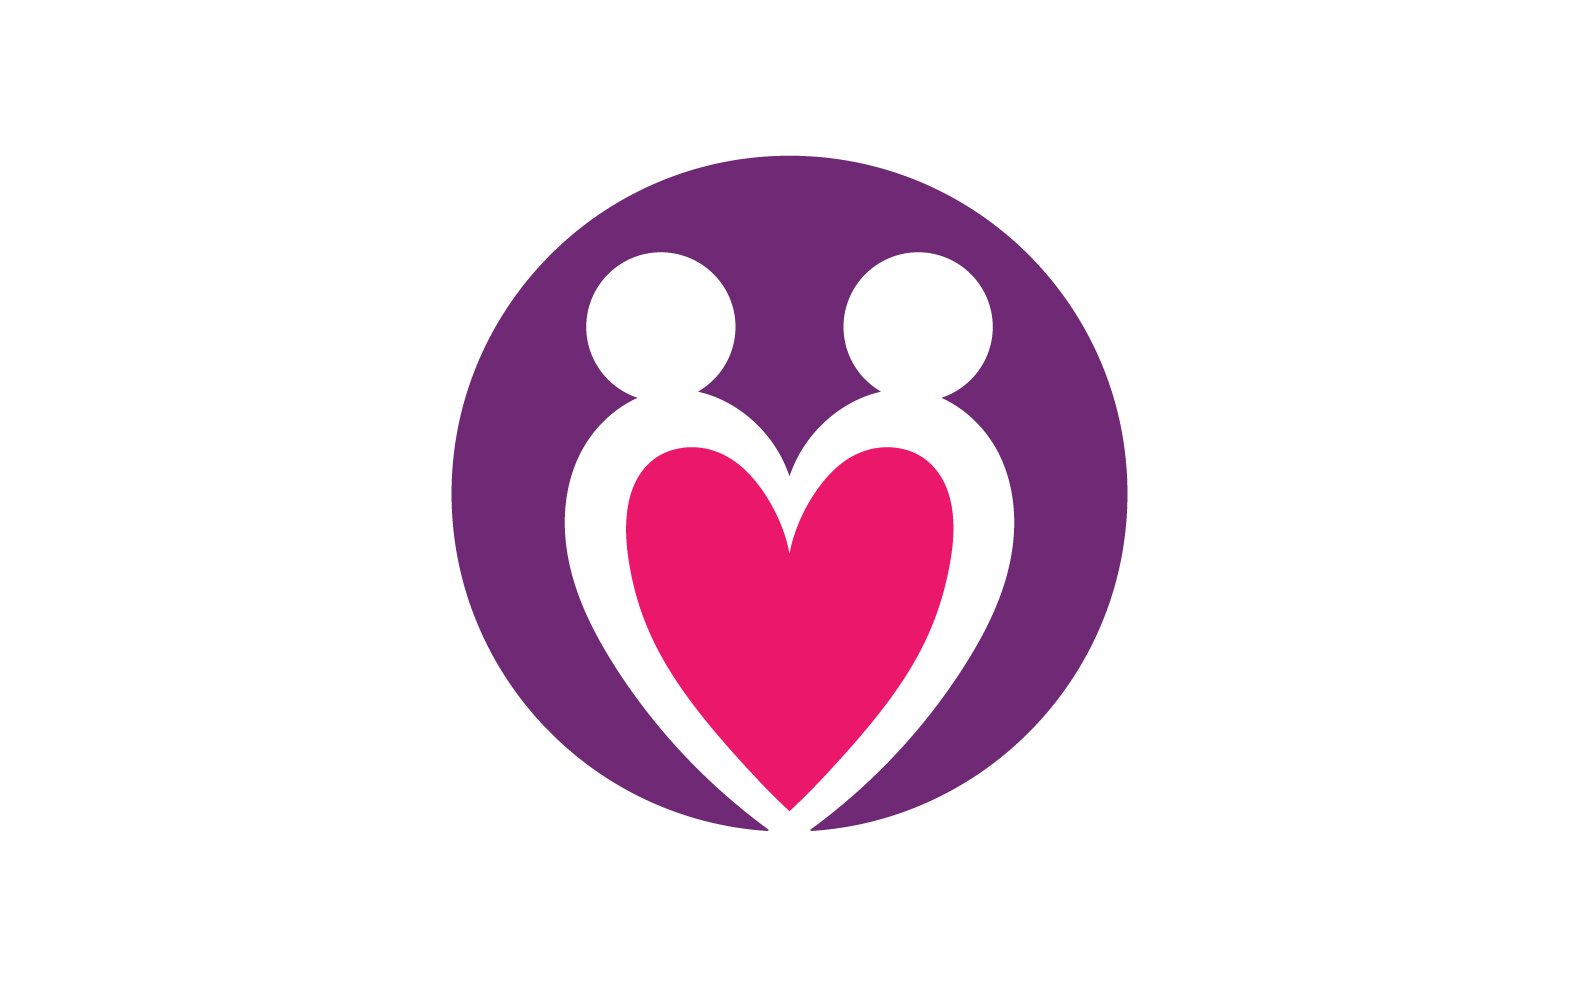 Community group and family care or adoption logo vector v39